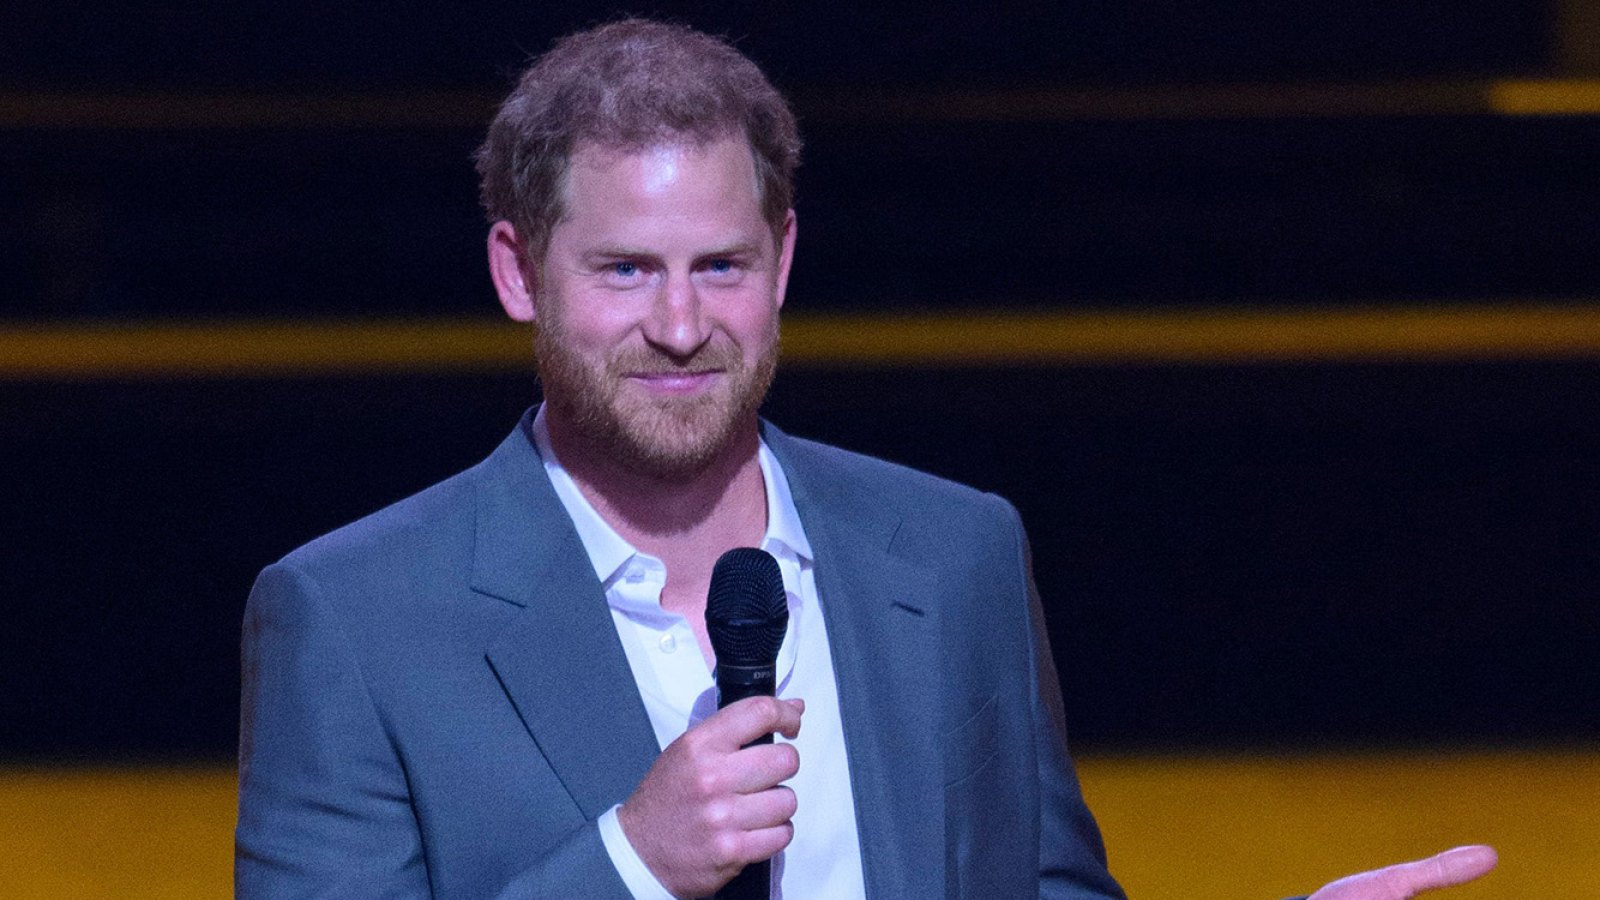 Prince Harry Reveals Son Archie Wants to Be a Pilot or Astronaut